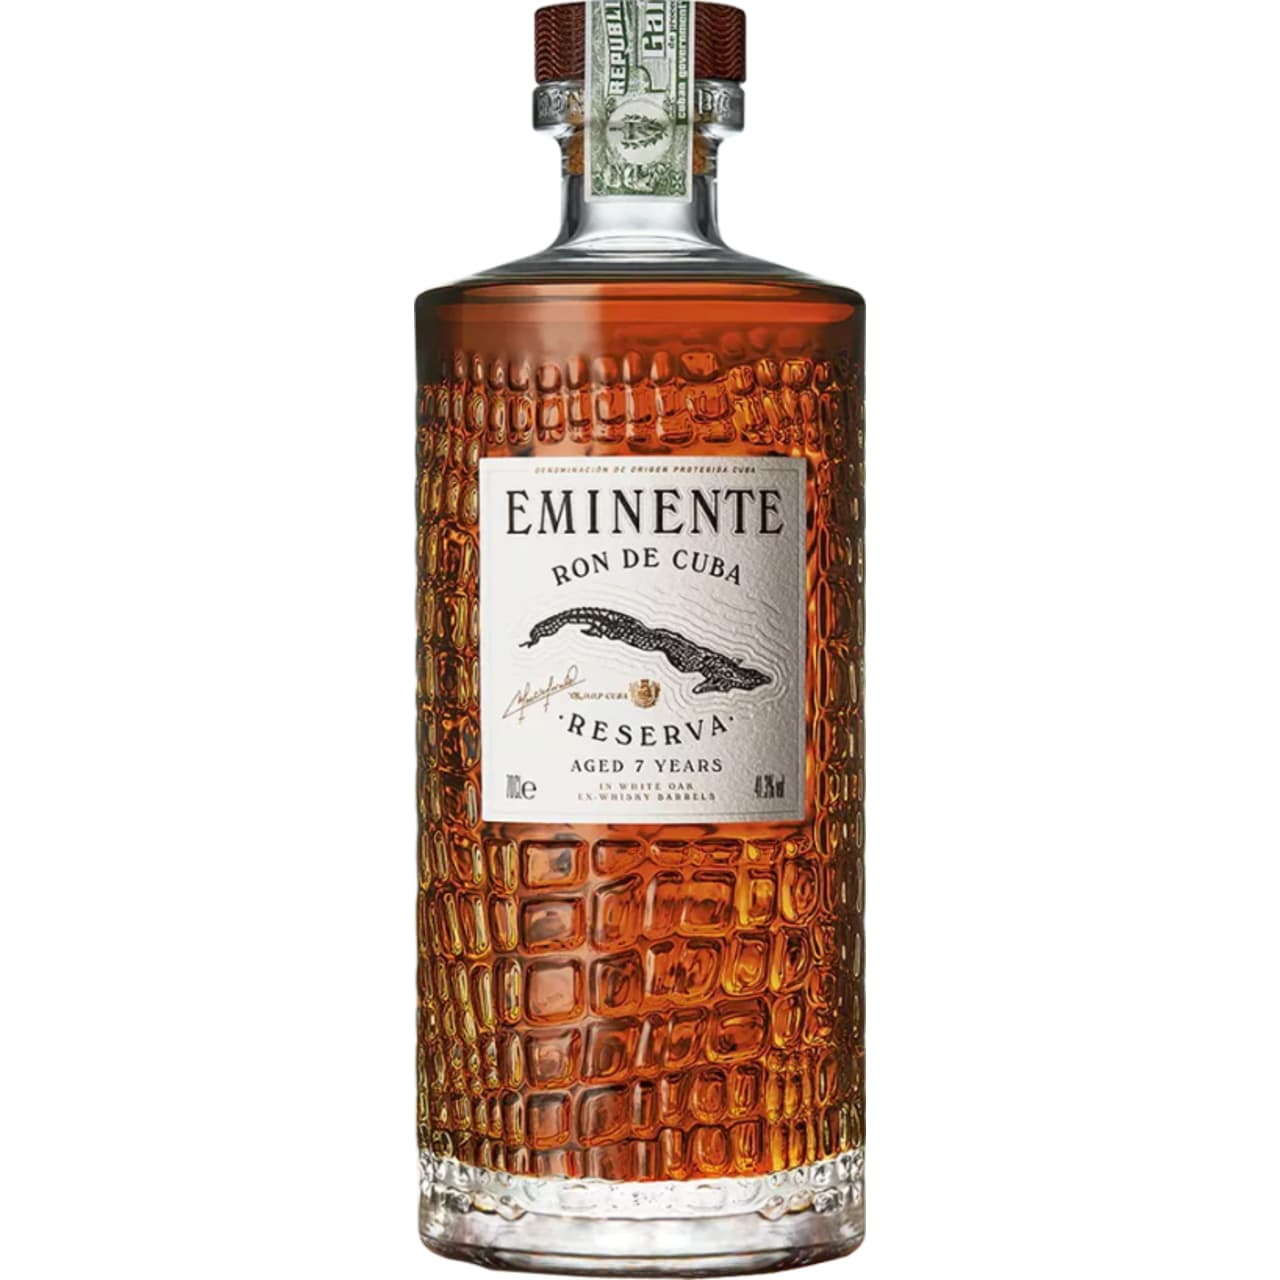 A robust seven-year-old, Eminente has been aged in white oak ex-whisky casks, creating aromas of freshly-ground coffee, toasted almonds, cocoa and dulce de leche on the nose.